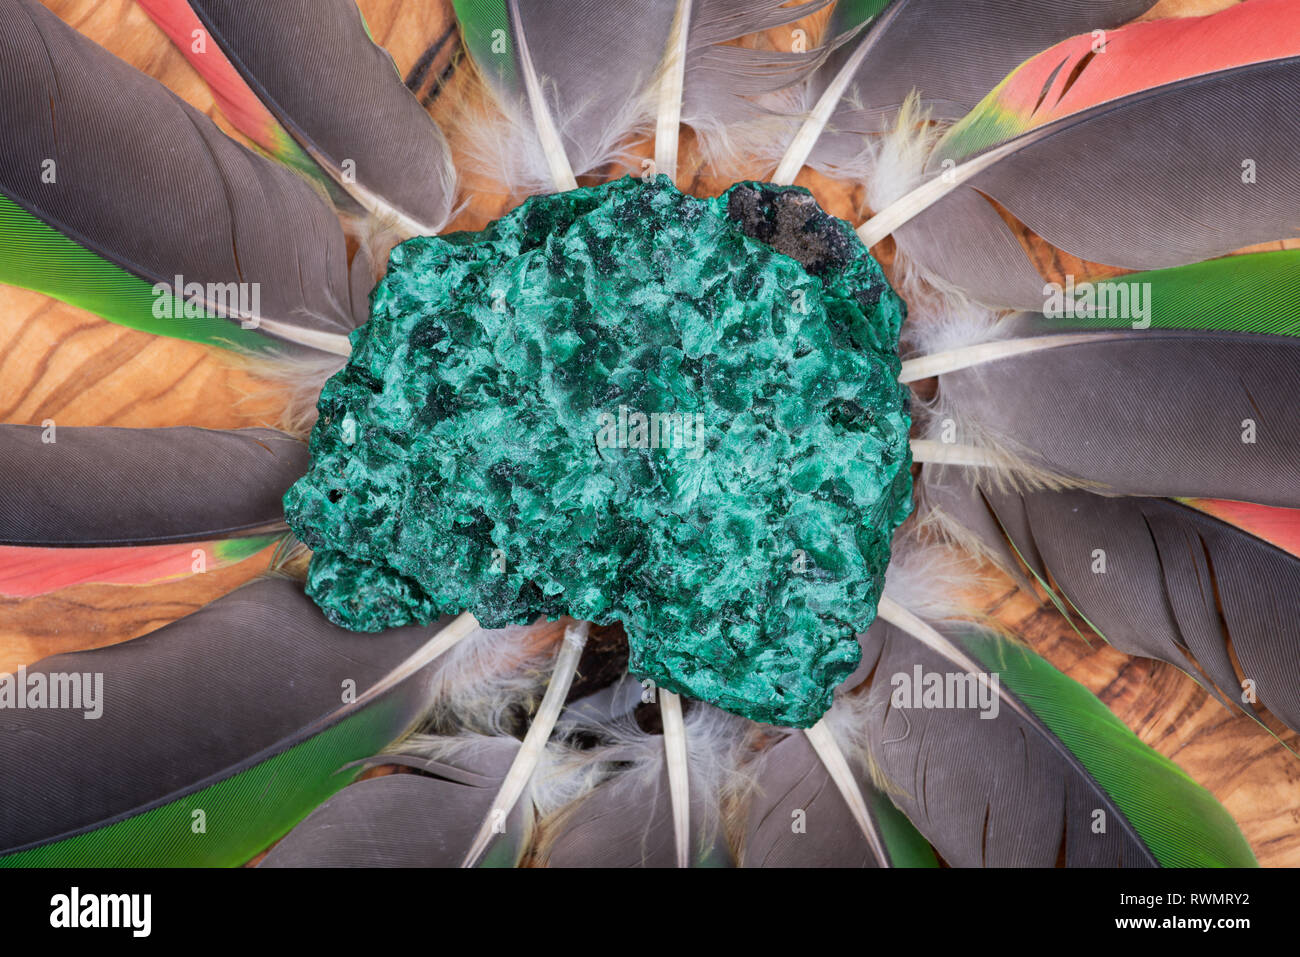 Dark green fibrous Malachite cluster from Shaba Province, Zaire, in the middle of a circle made of colorful parrot feathers. Stock Photo